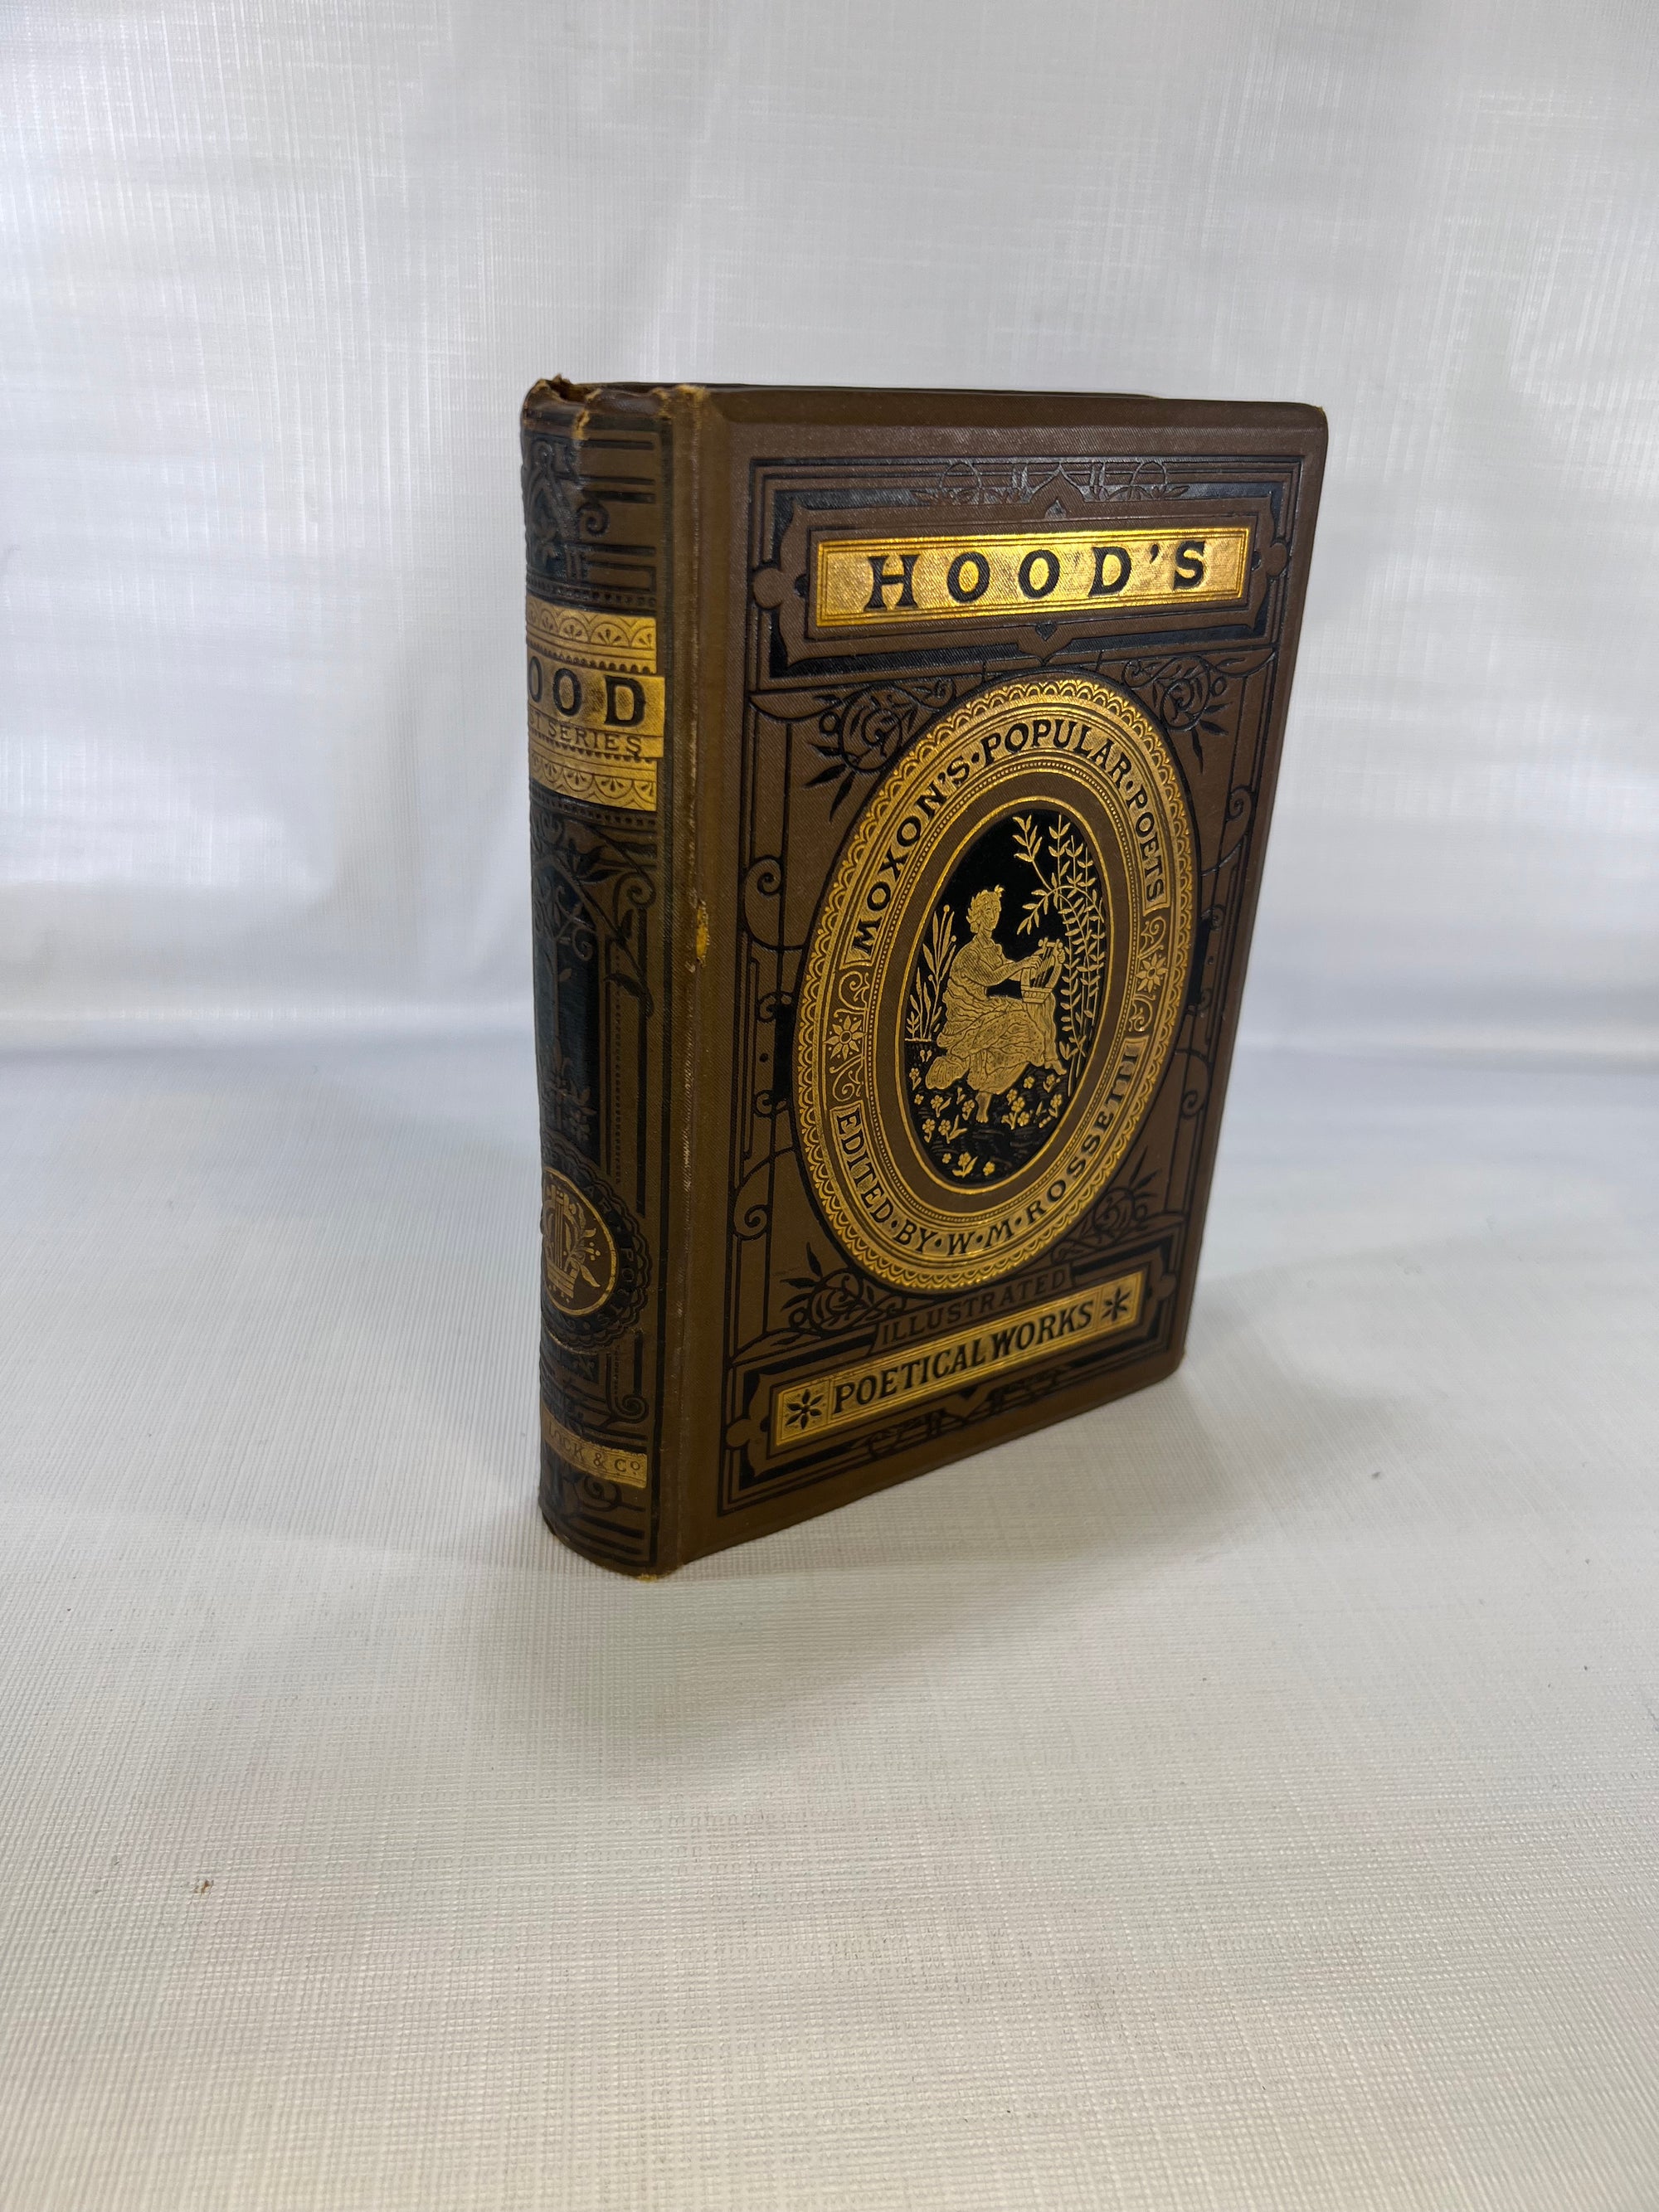 The Poetical Works of Thomas Hood edited with a Critical Memoir, William Micheal Rossetti with Illustrations Ward, Lock and Co,